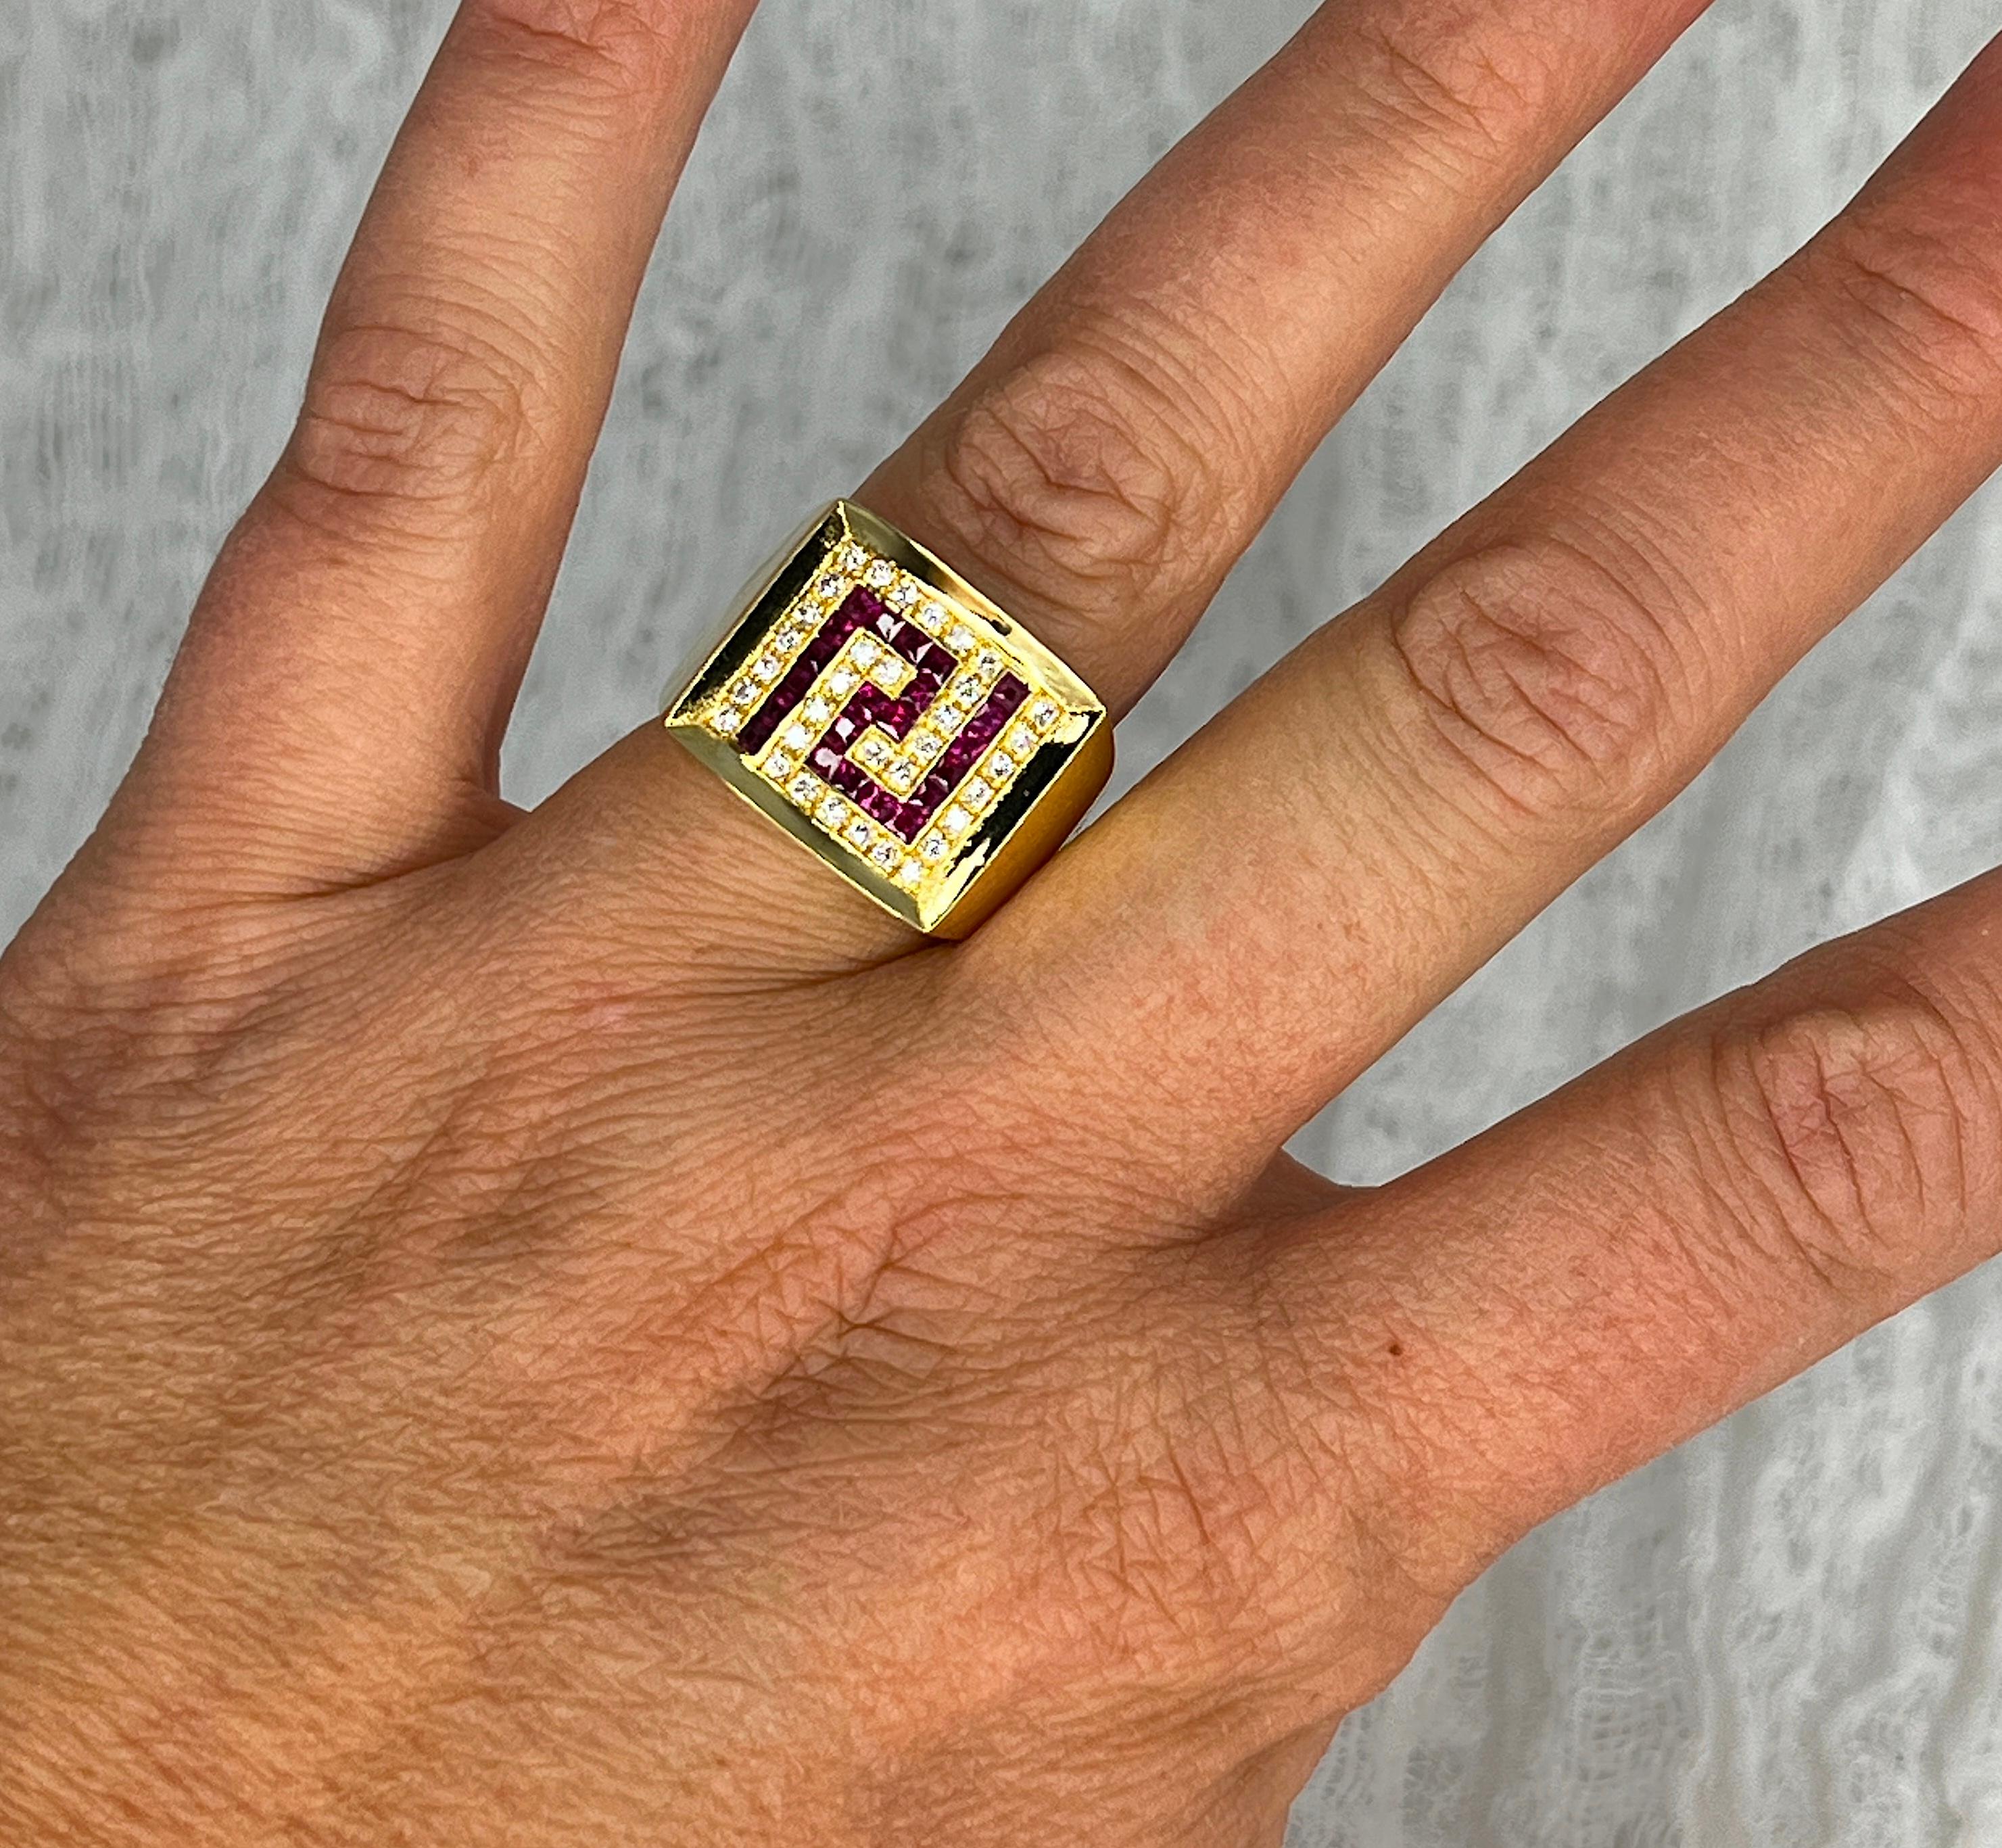 This S.Georgios designer 18 Karat Yellow Gold Ring features the Greek Key design symbolizing eternity. It is all Hand Made and has Brilliant Cut White Diamonds with a total weight of 0.32 Carat, and Princess-cut Rubies in an invisible setting with a